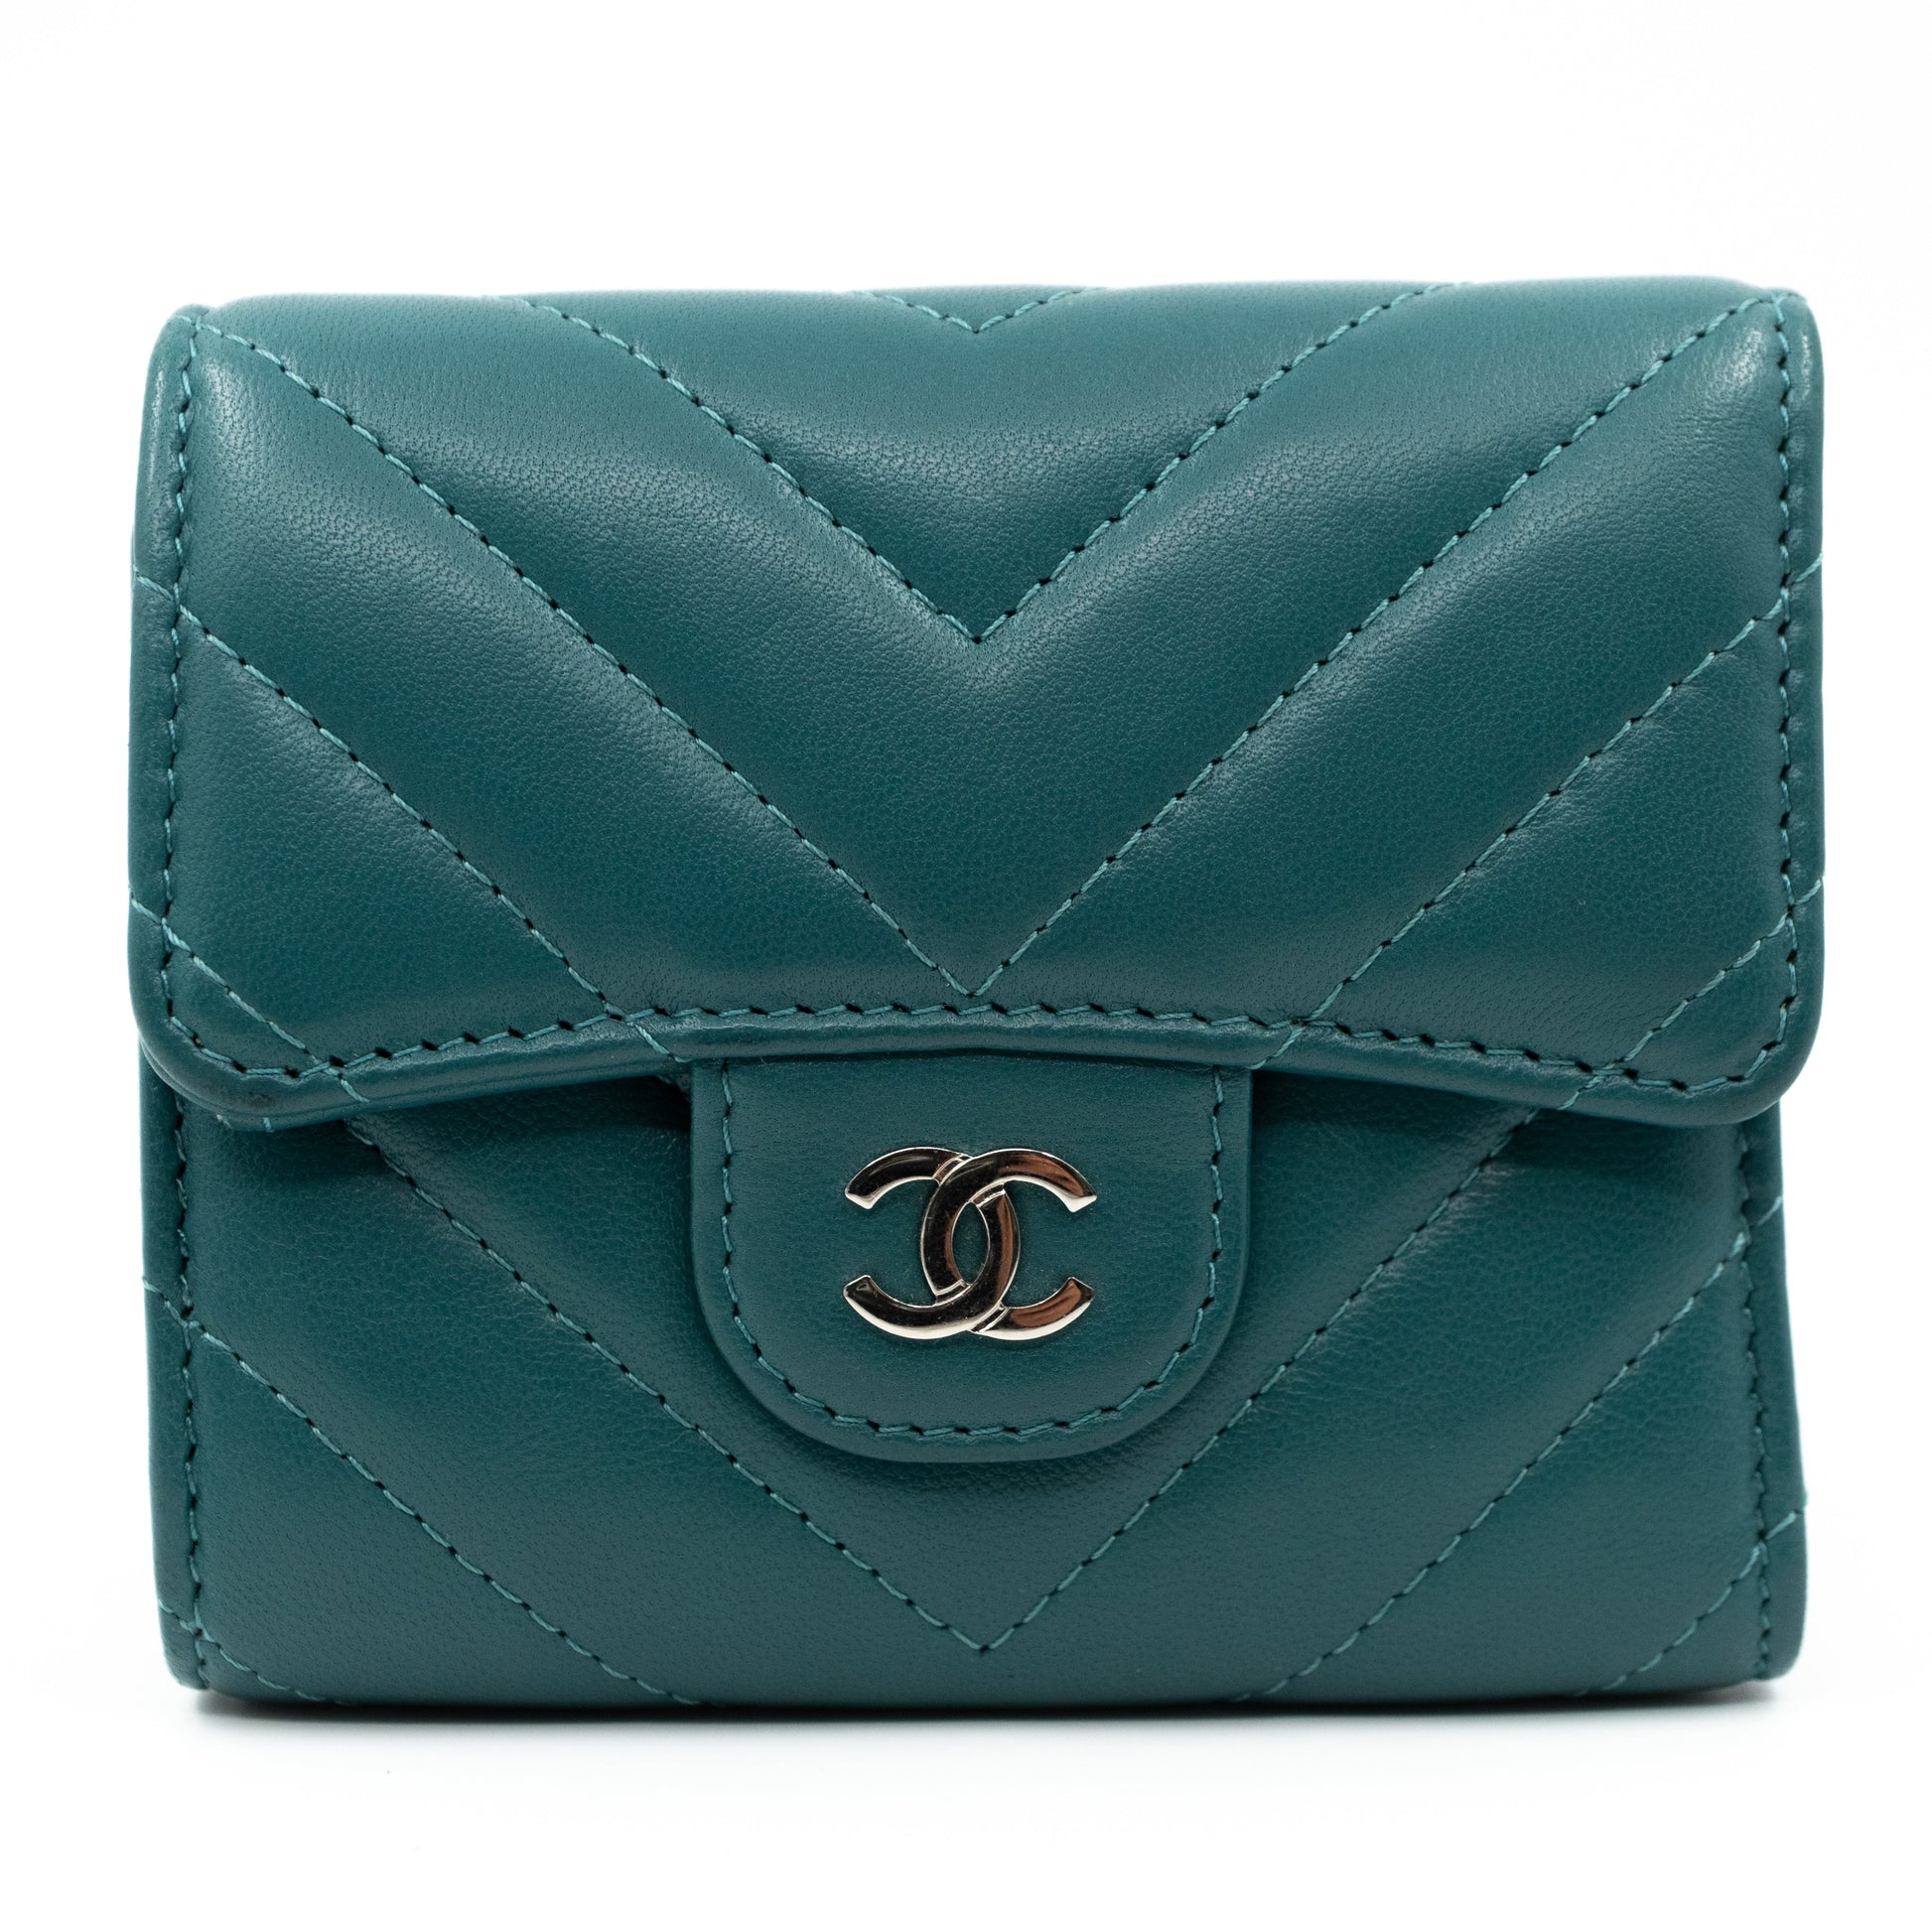 Chanel Classic Small Flap Wallet Ap0231 Y04059 NL298 , Green, One Size